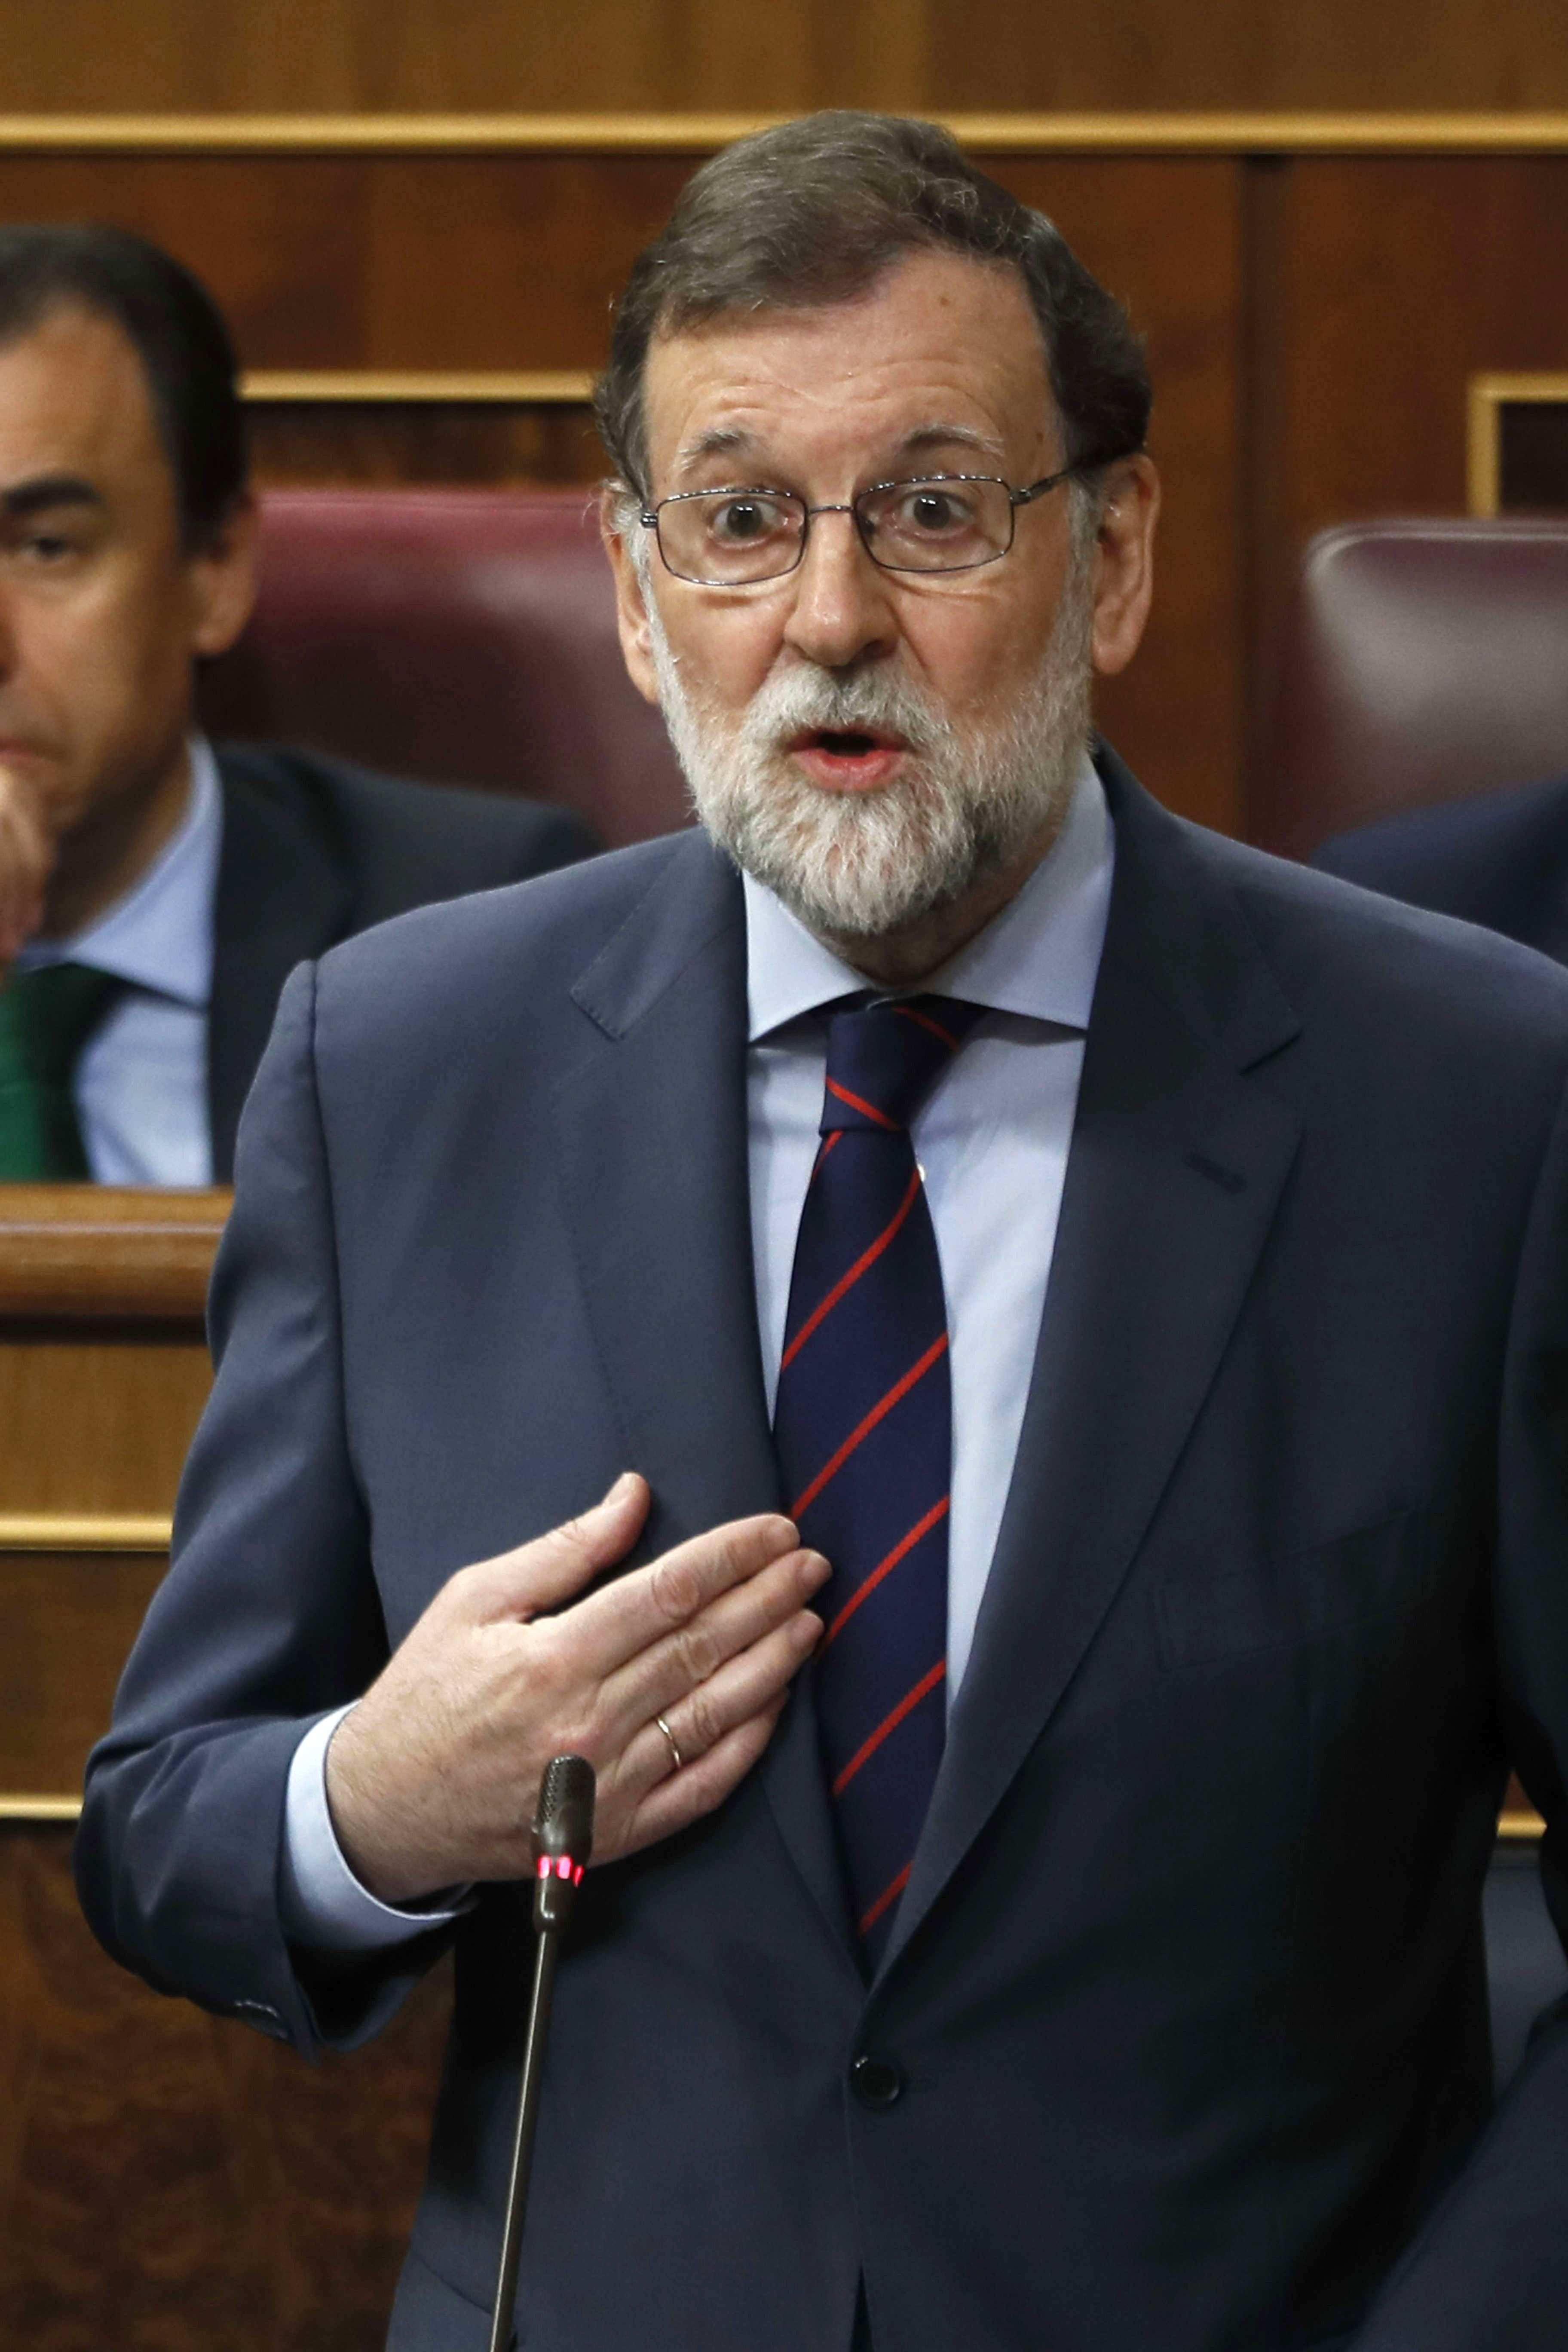 Spanish government warns Torra of his "obligation to respect the law"